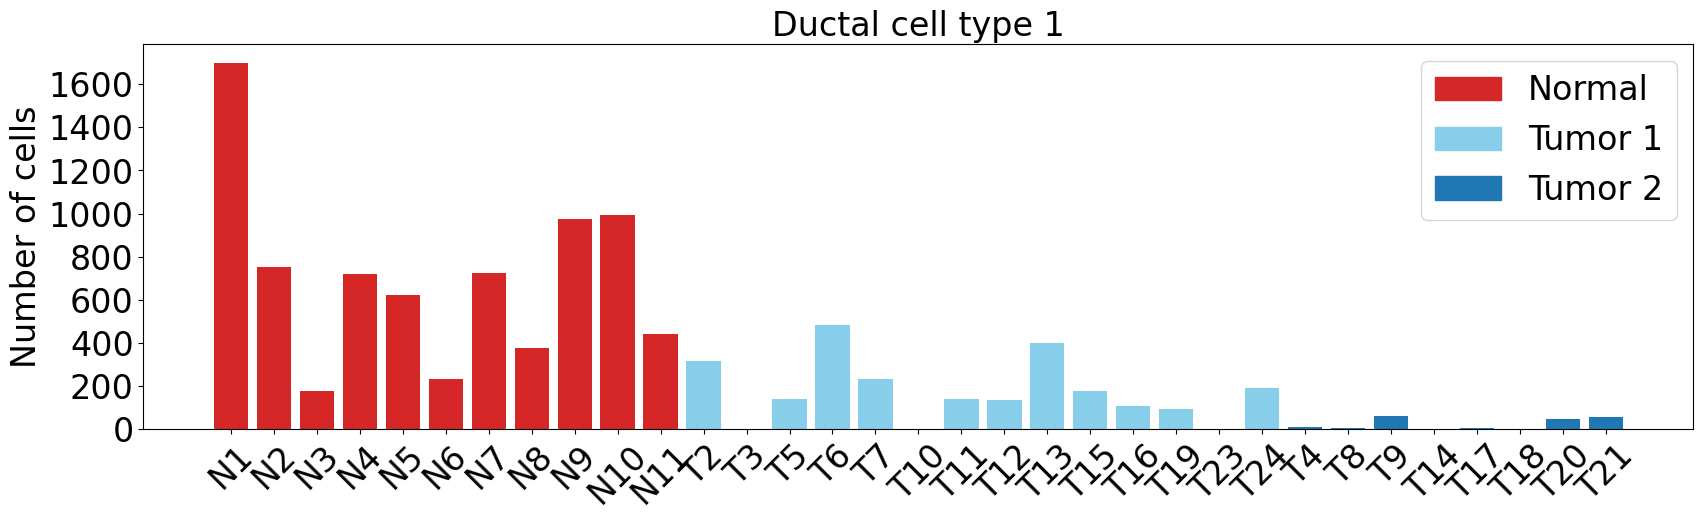 Ductal_cell_type1_1.png